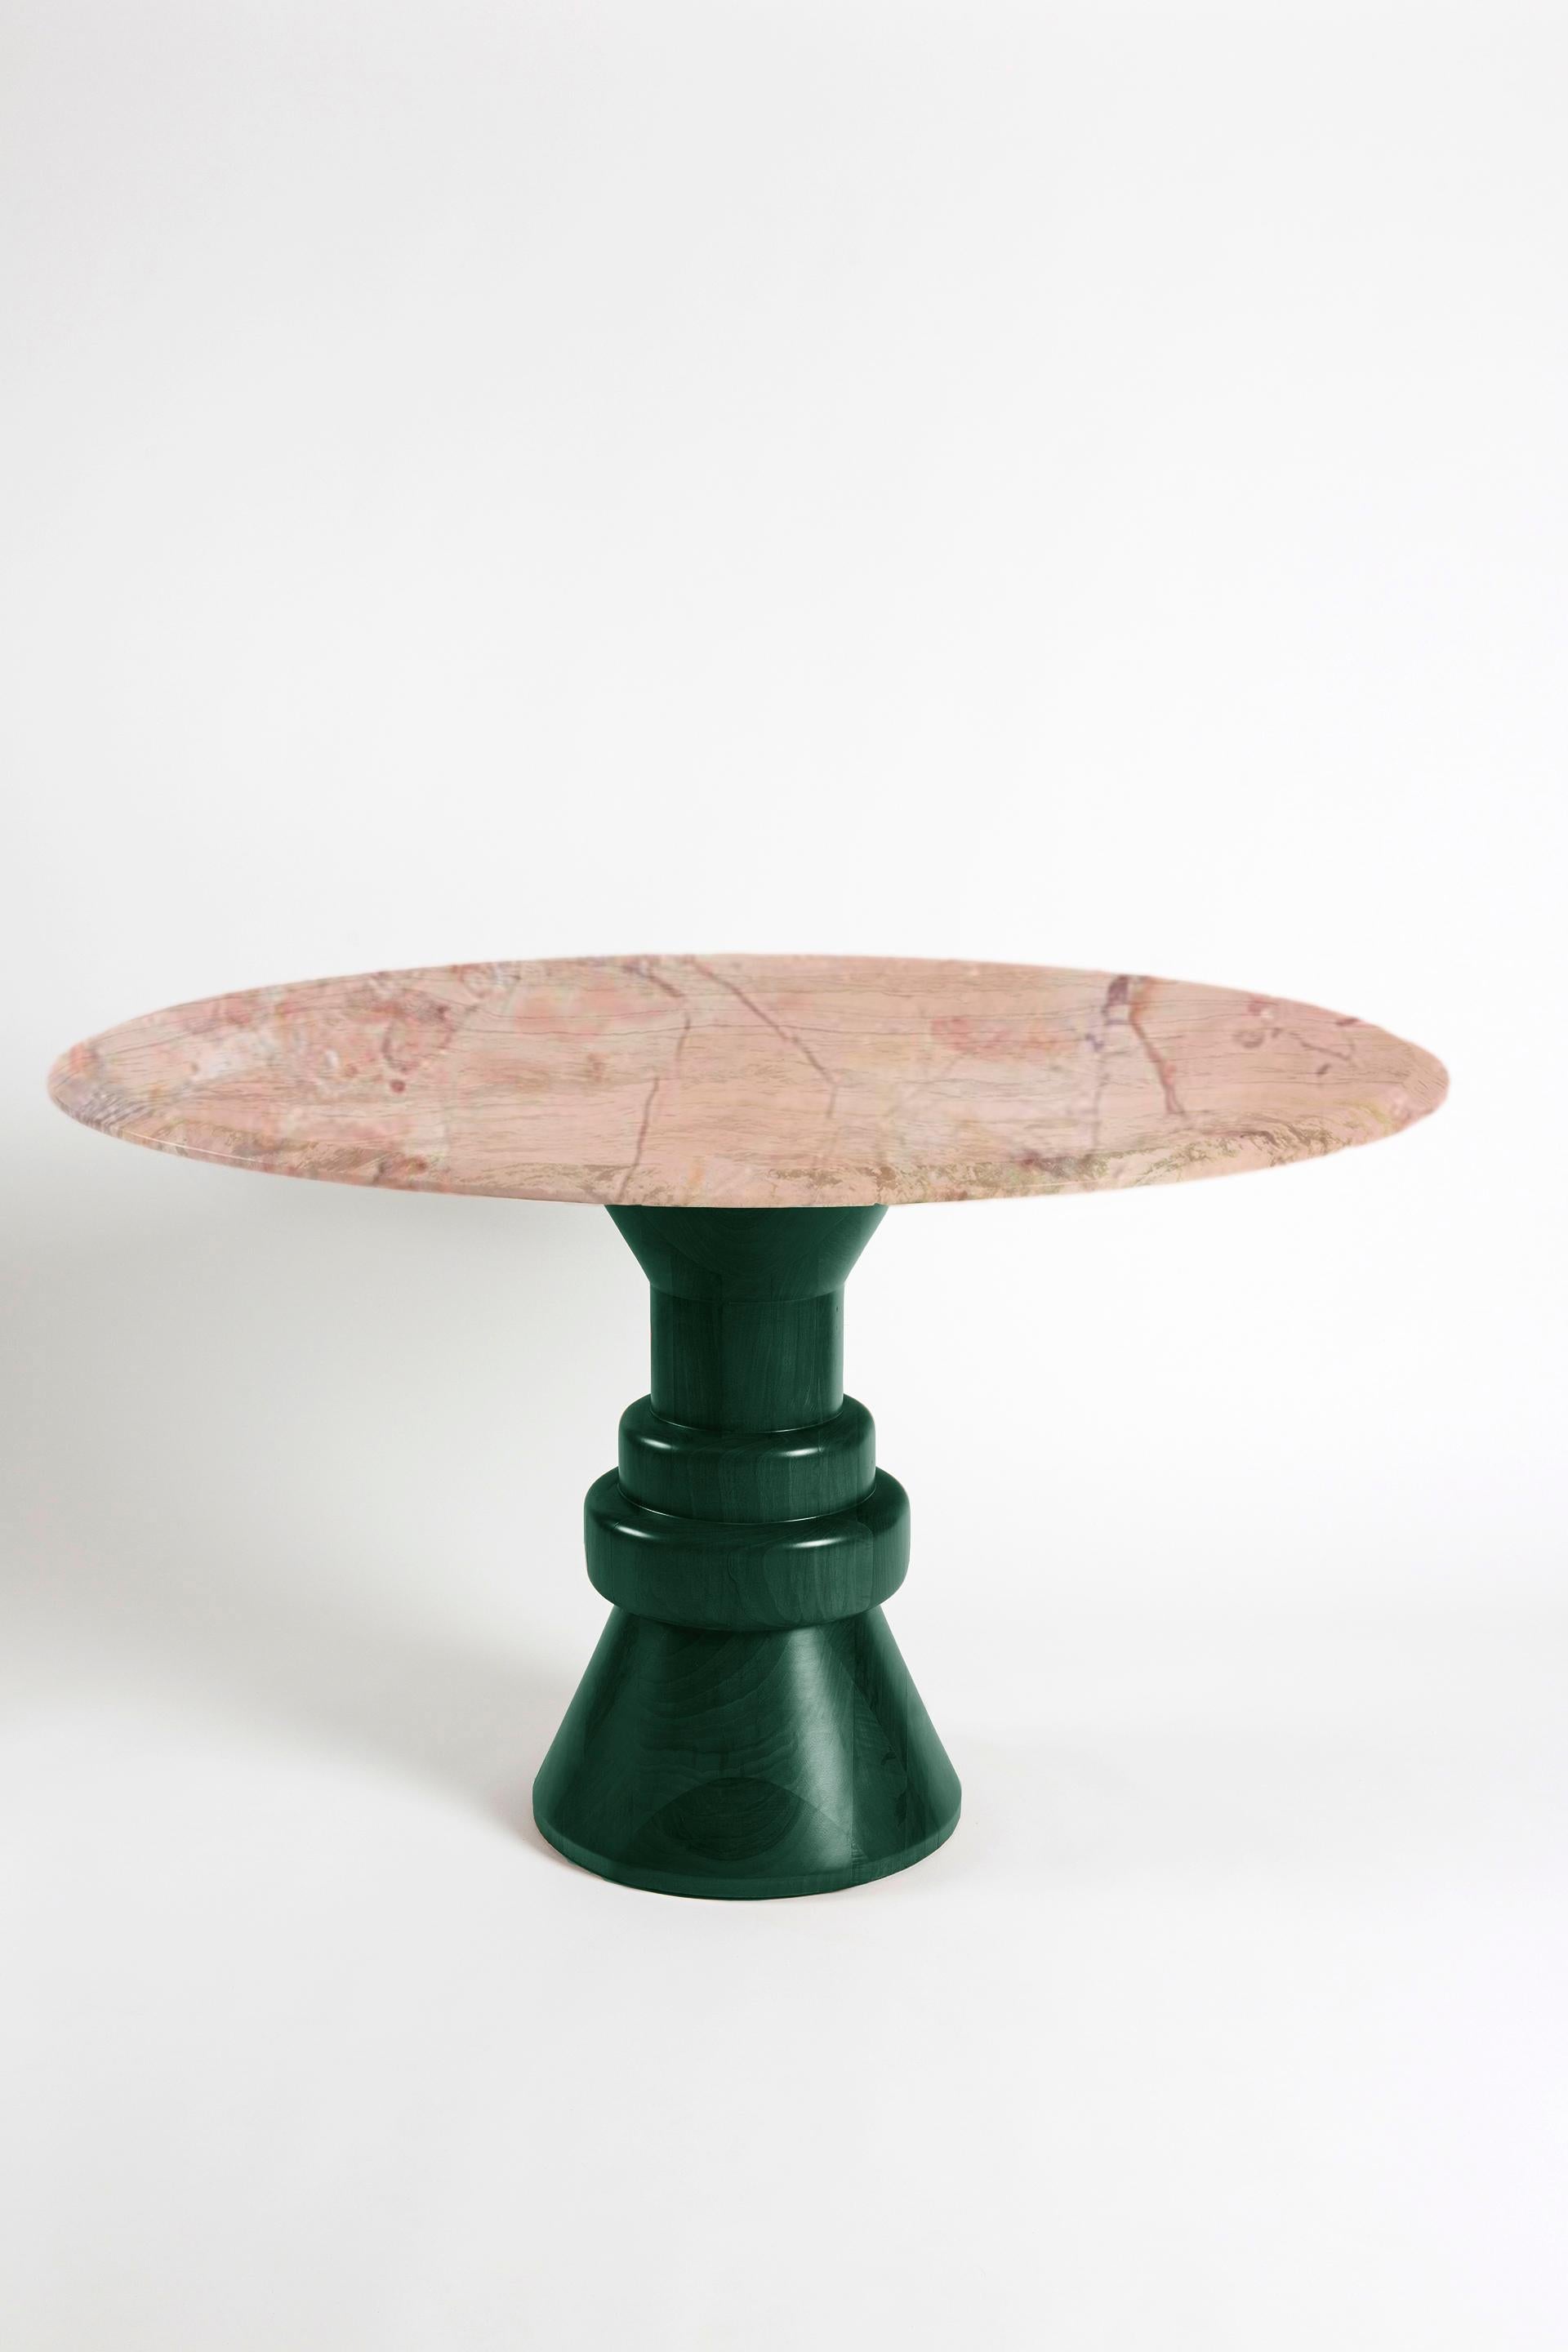 21st Century Green Marble Round Dining Table with Sculptural Wooden Base For Sale 2